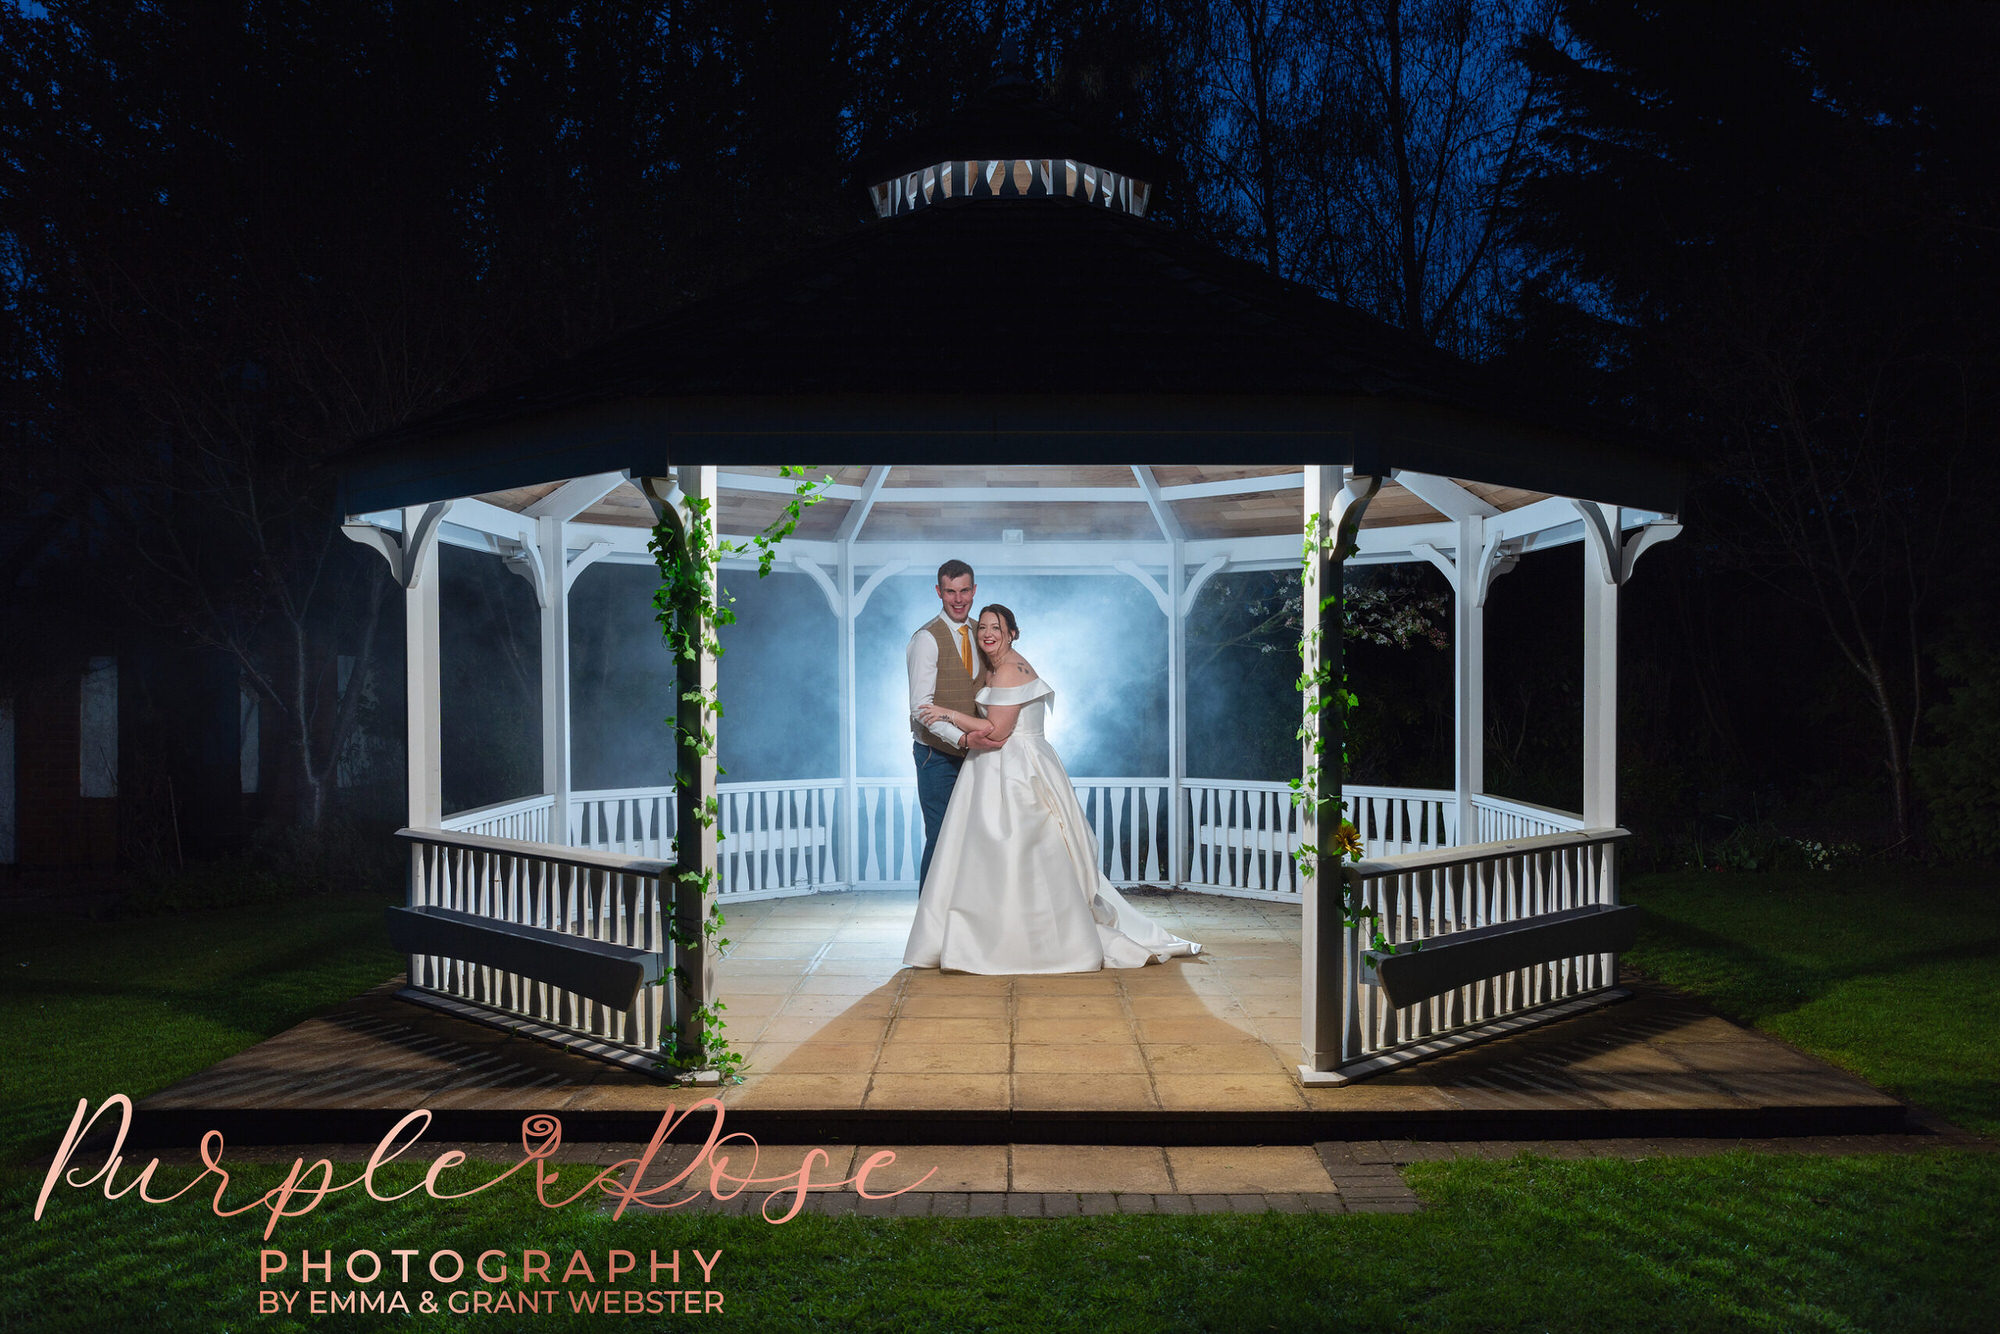 Things to consider when choosing a wedding photographer